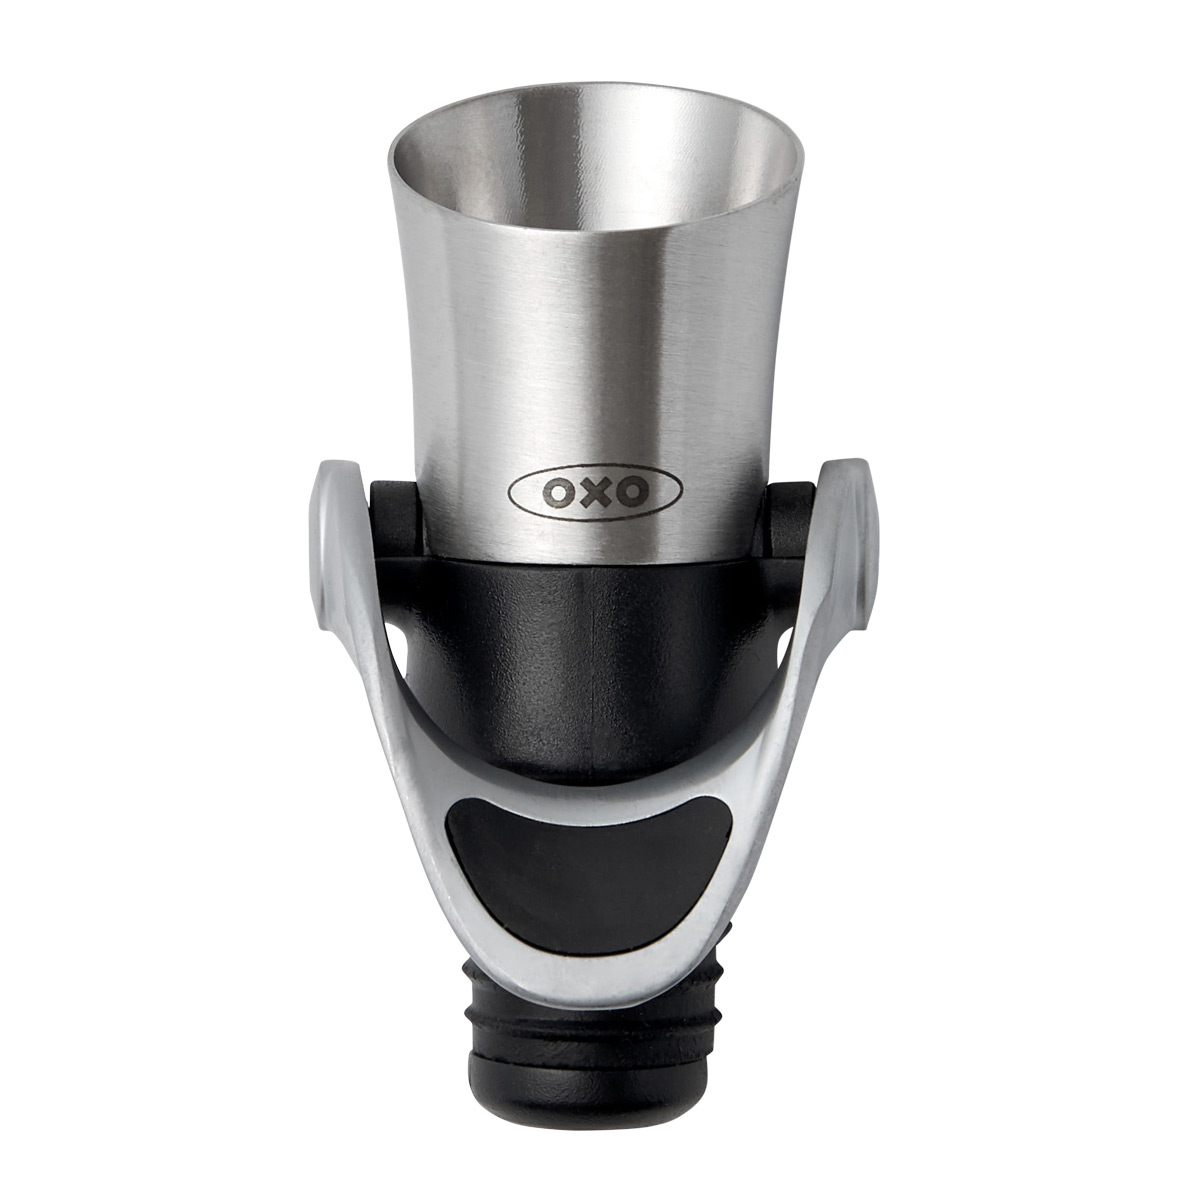 WINE STOPPER Bottle Stopper OXO SteeL Expanding Wine Stoppers REVIEW 